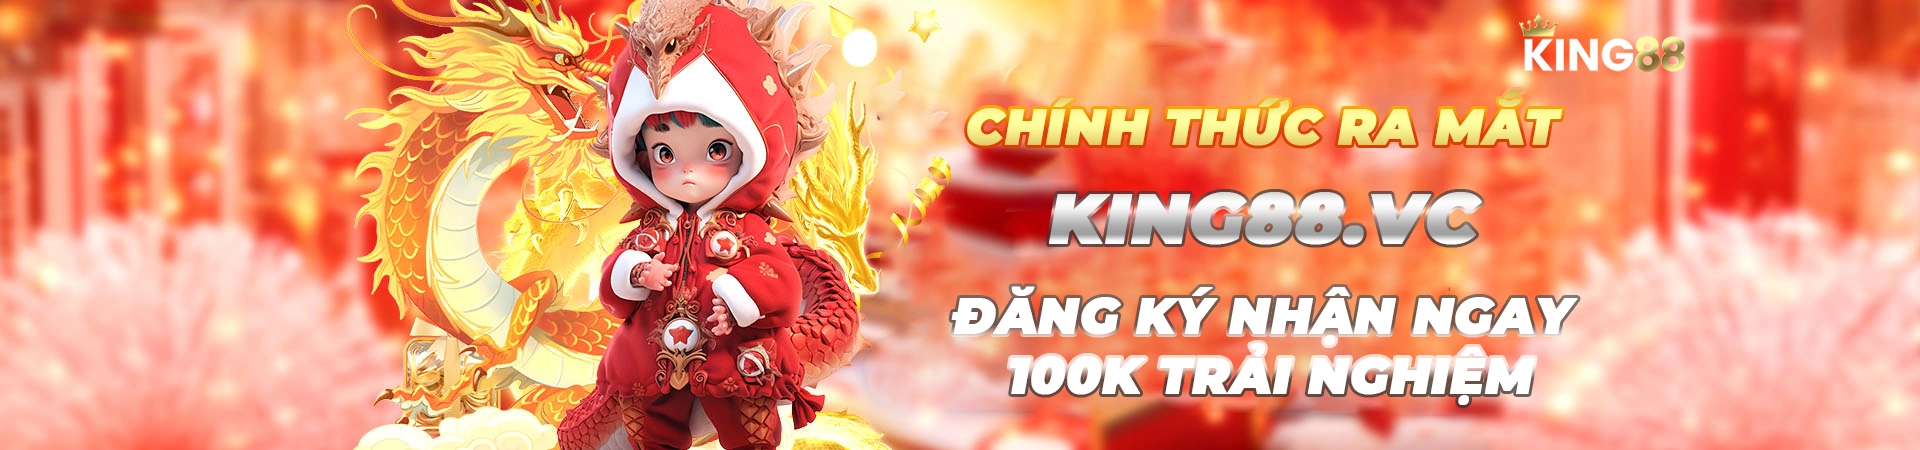 banner king88.vc